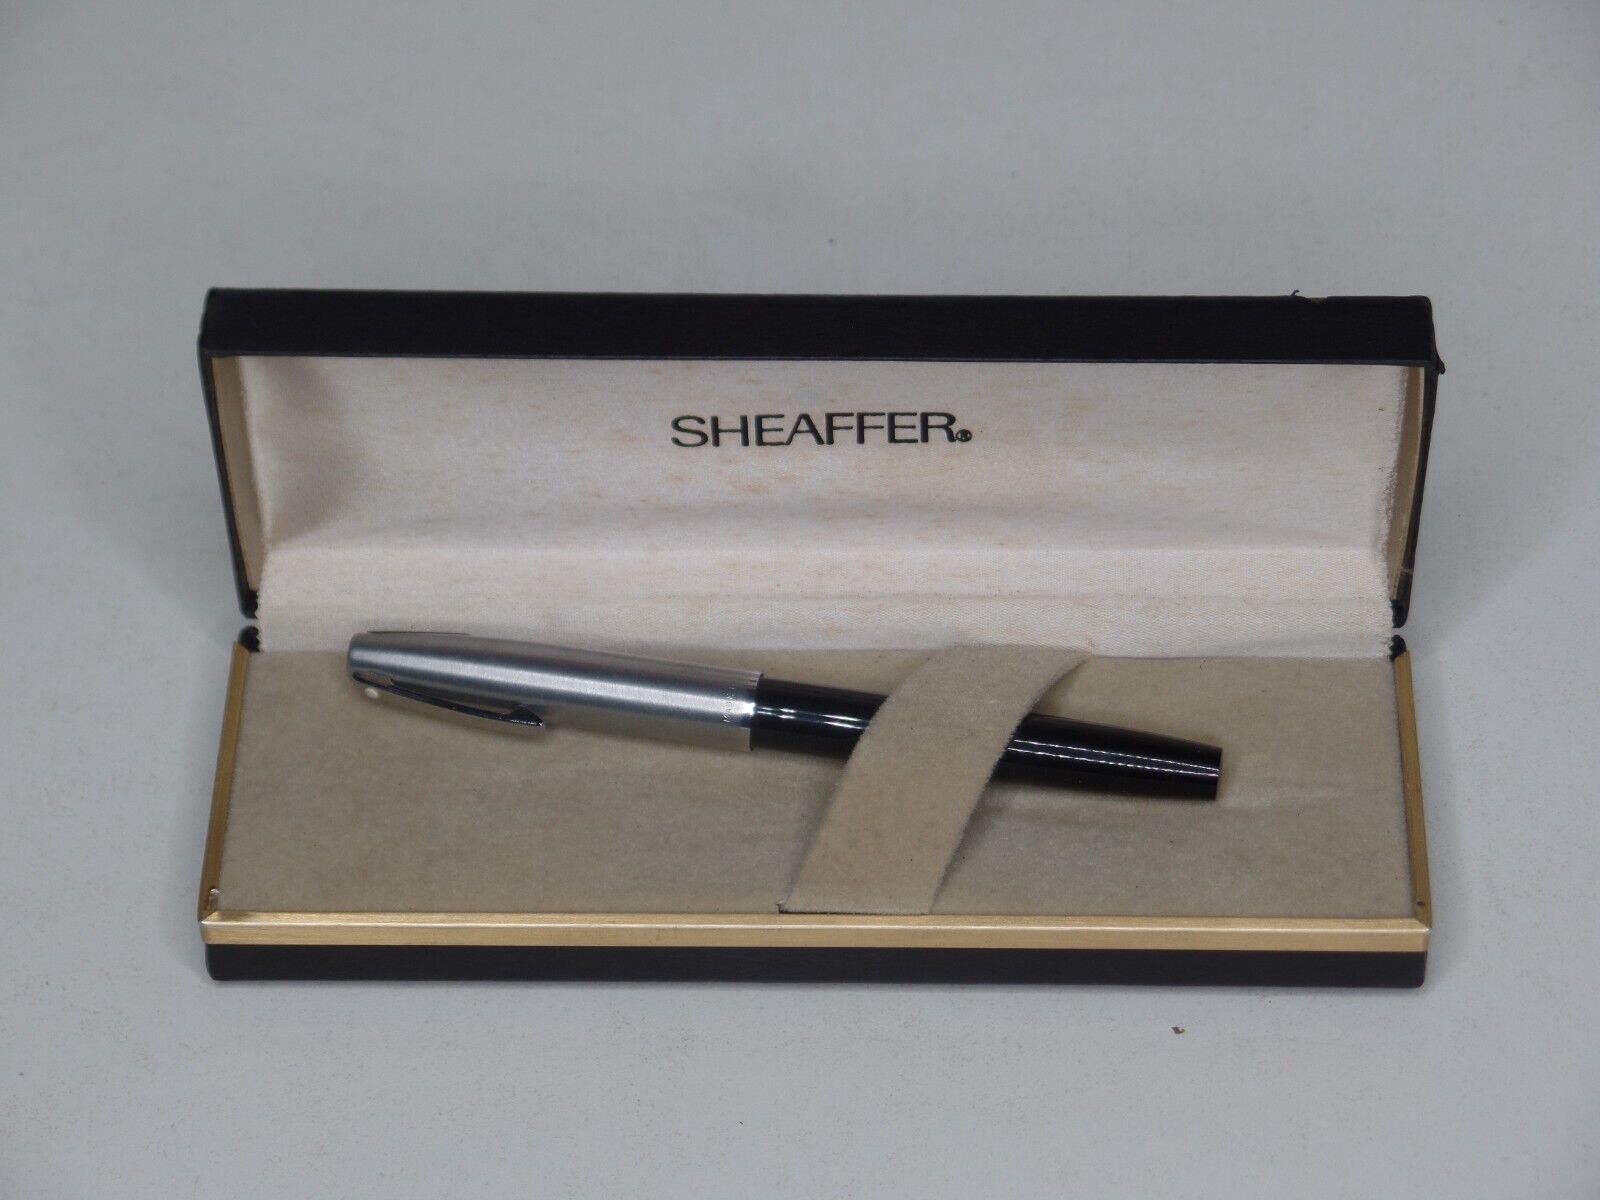 Sheaffer Fountain Pen 440 XF Black and Silver Pen with Case Made in USA